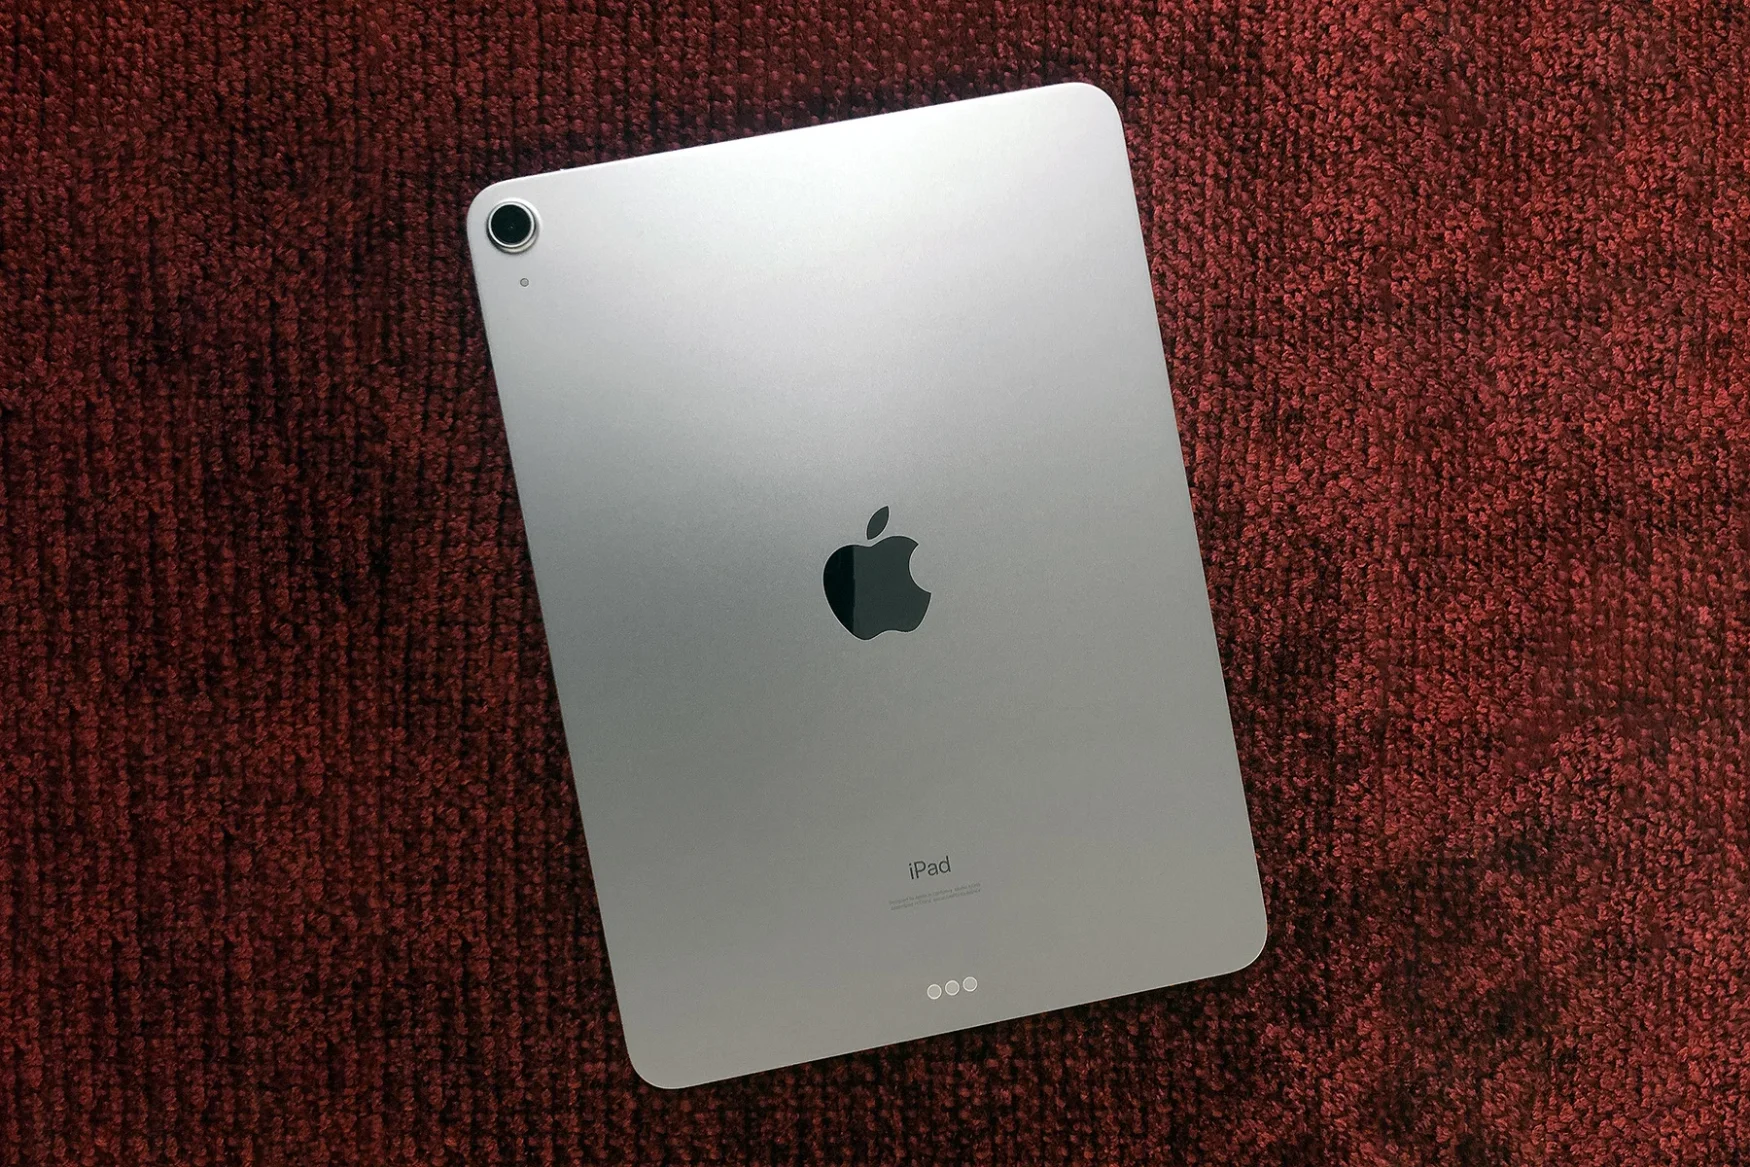 Apple's 2020 iPad Air drops to its lowest price yet on Amazon